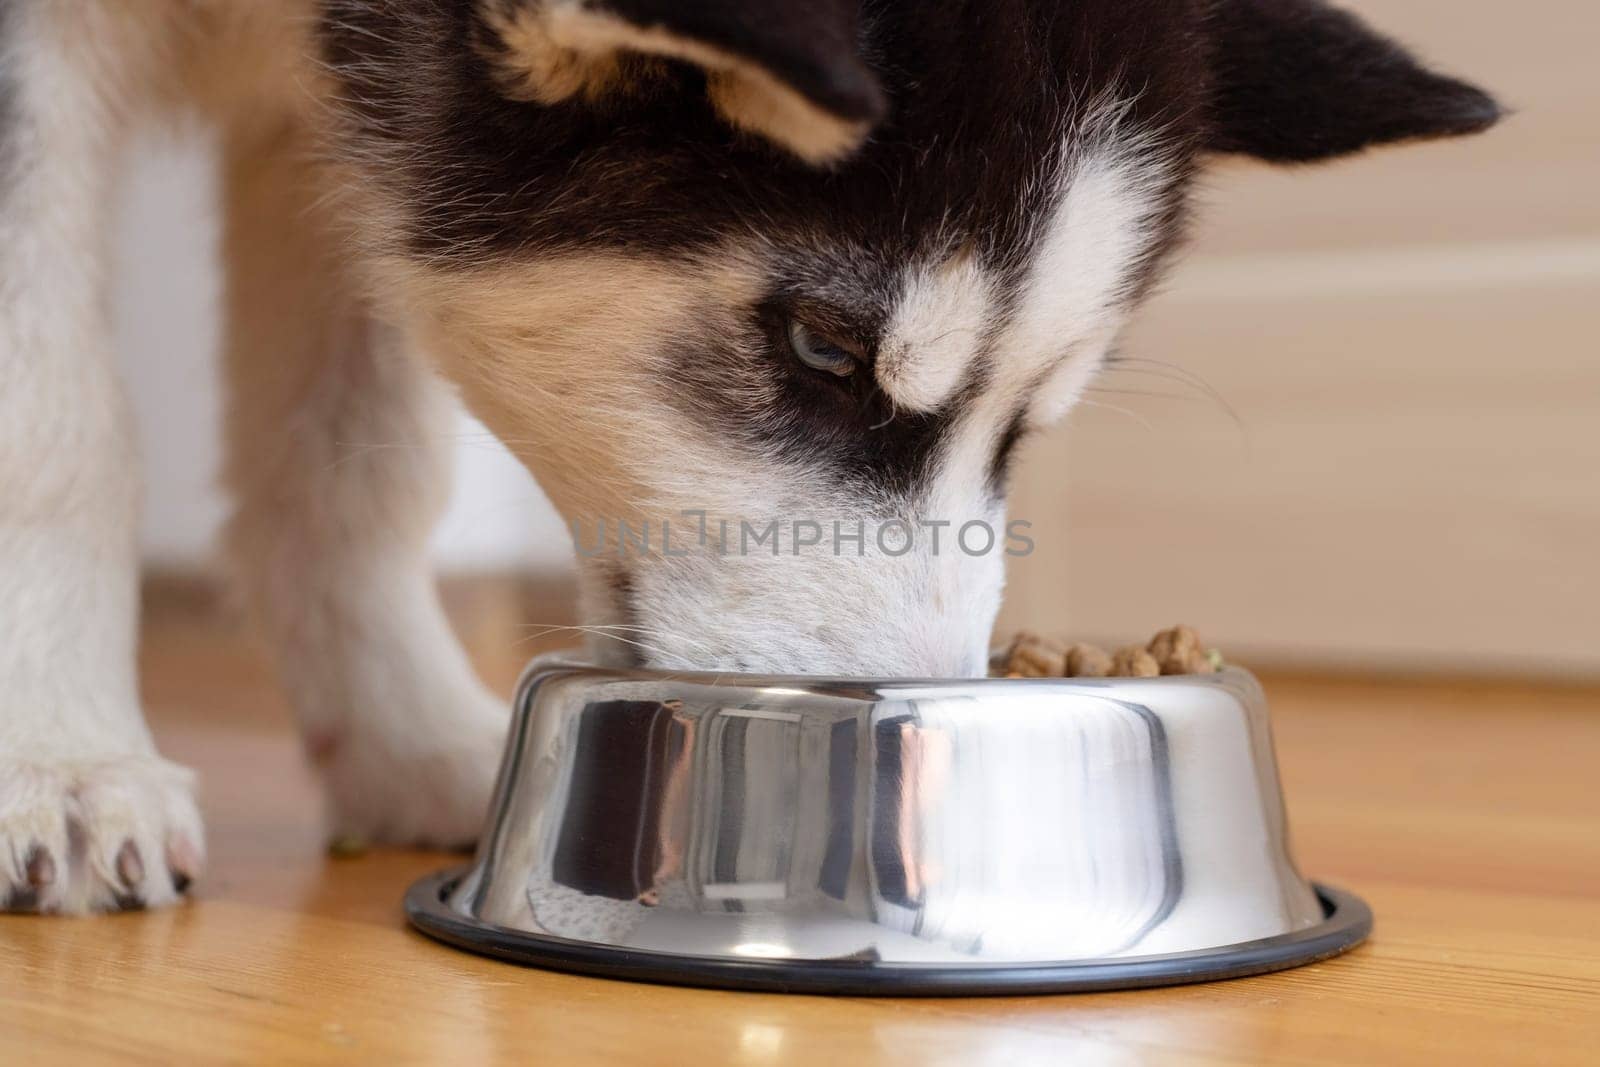 Cute Husky puppy eating from a bowl at home. The puppy is eating food. Adorable pet.